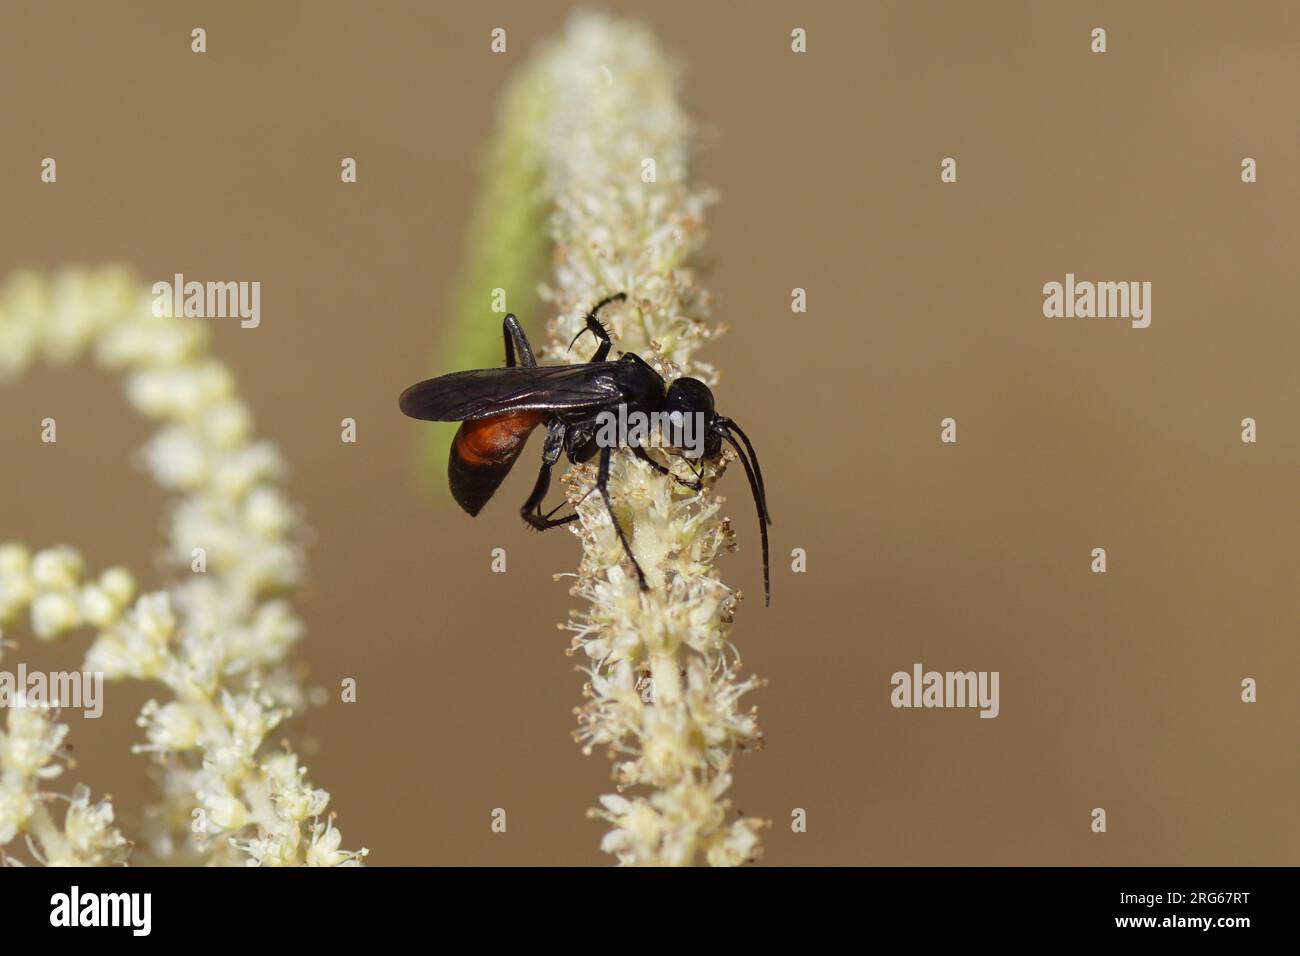 Spider wasp Anoplius infuscatus, family Pompilidae. On flowers of flowers of Goatsbeard (Aruncus dioicus). Rose family (Rosaceae). Dutch garden, June Stock Photo